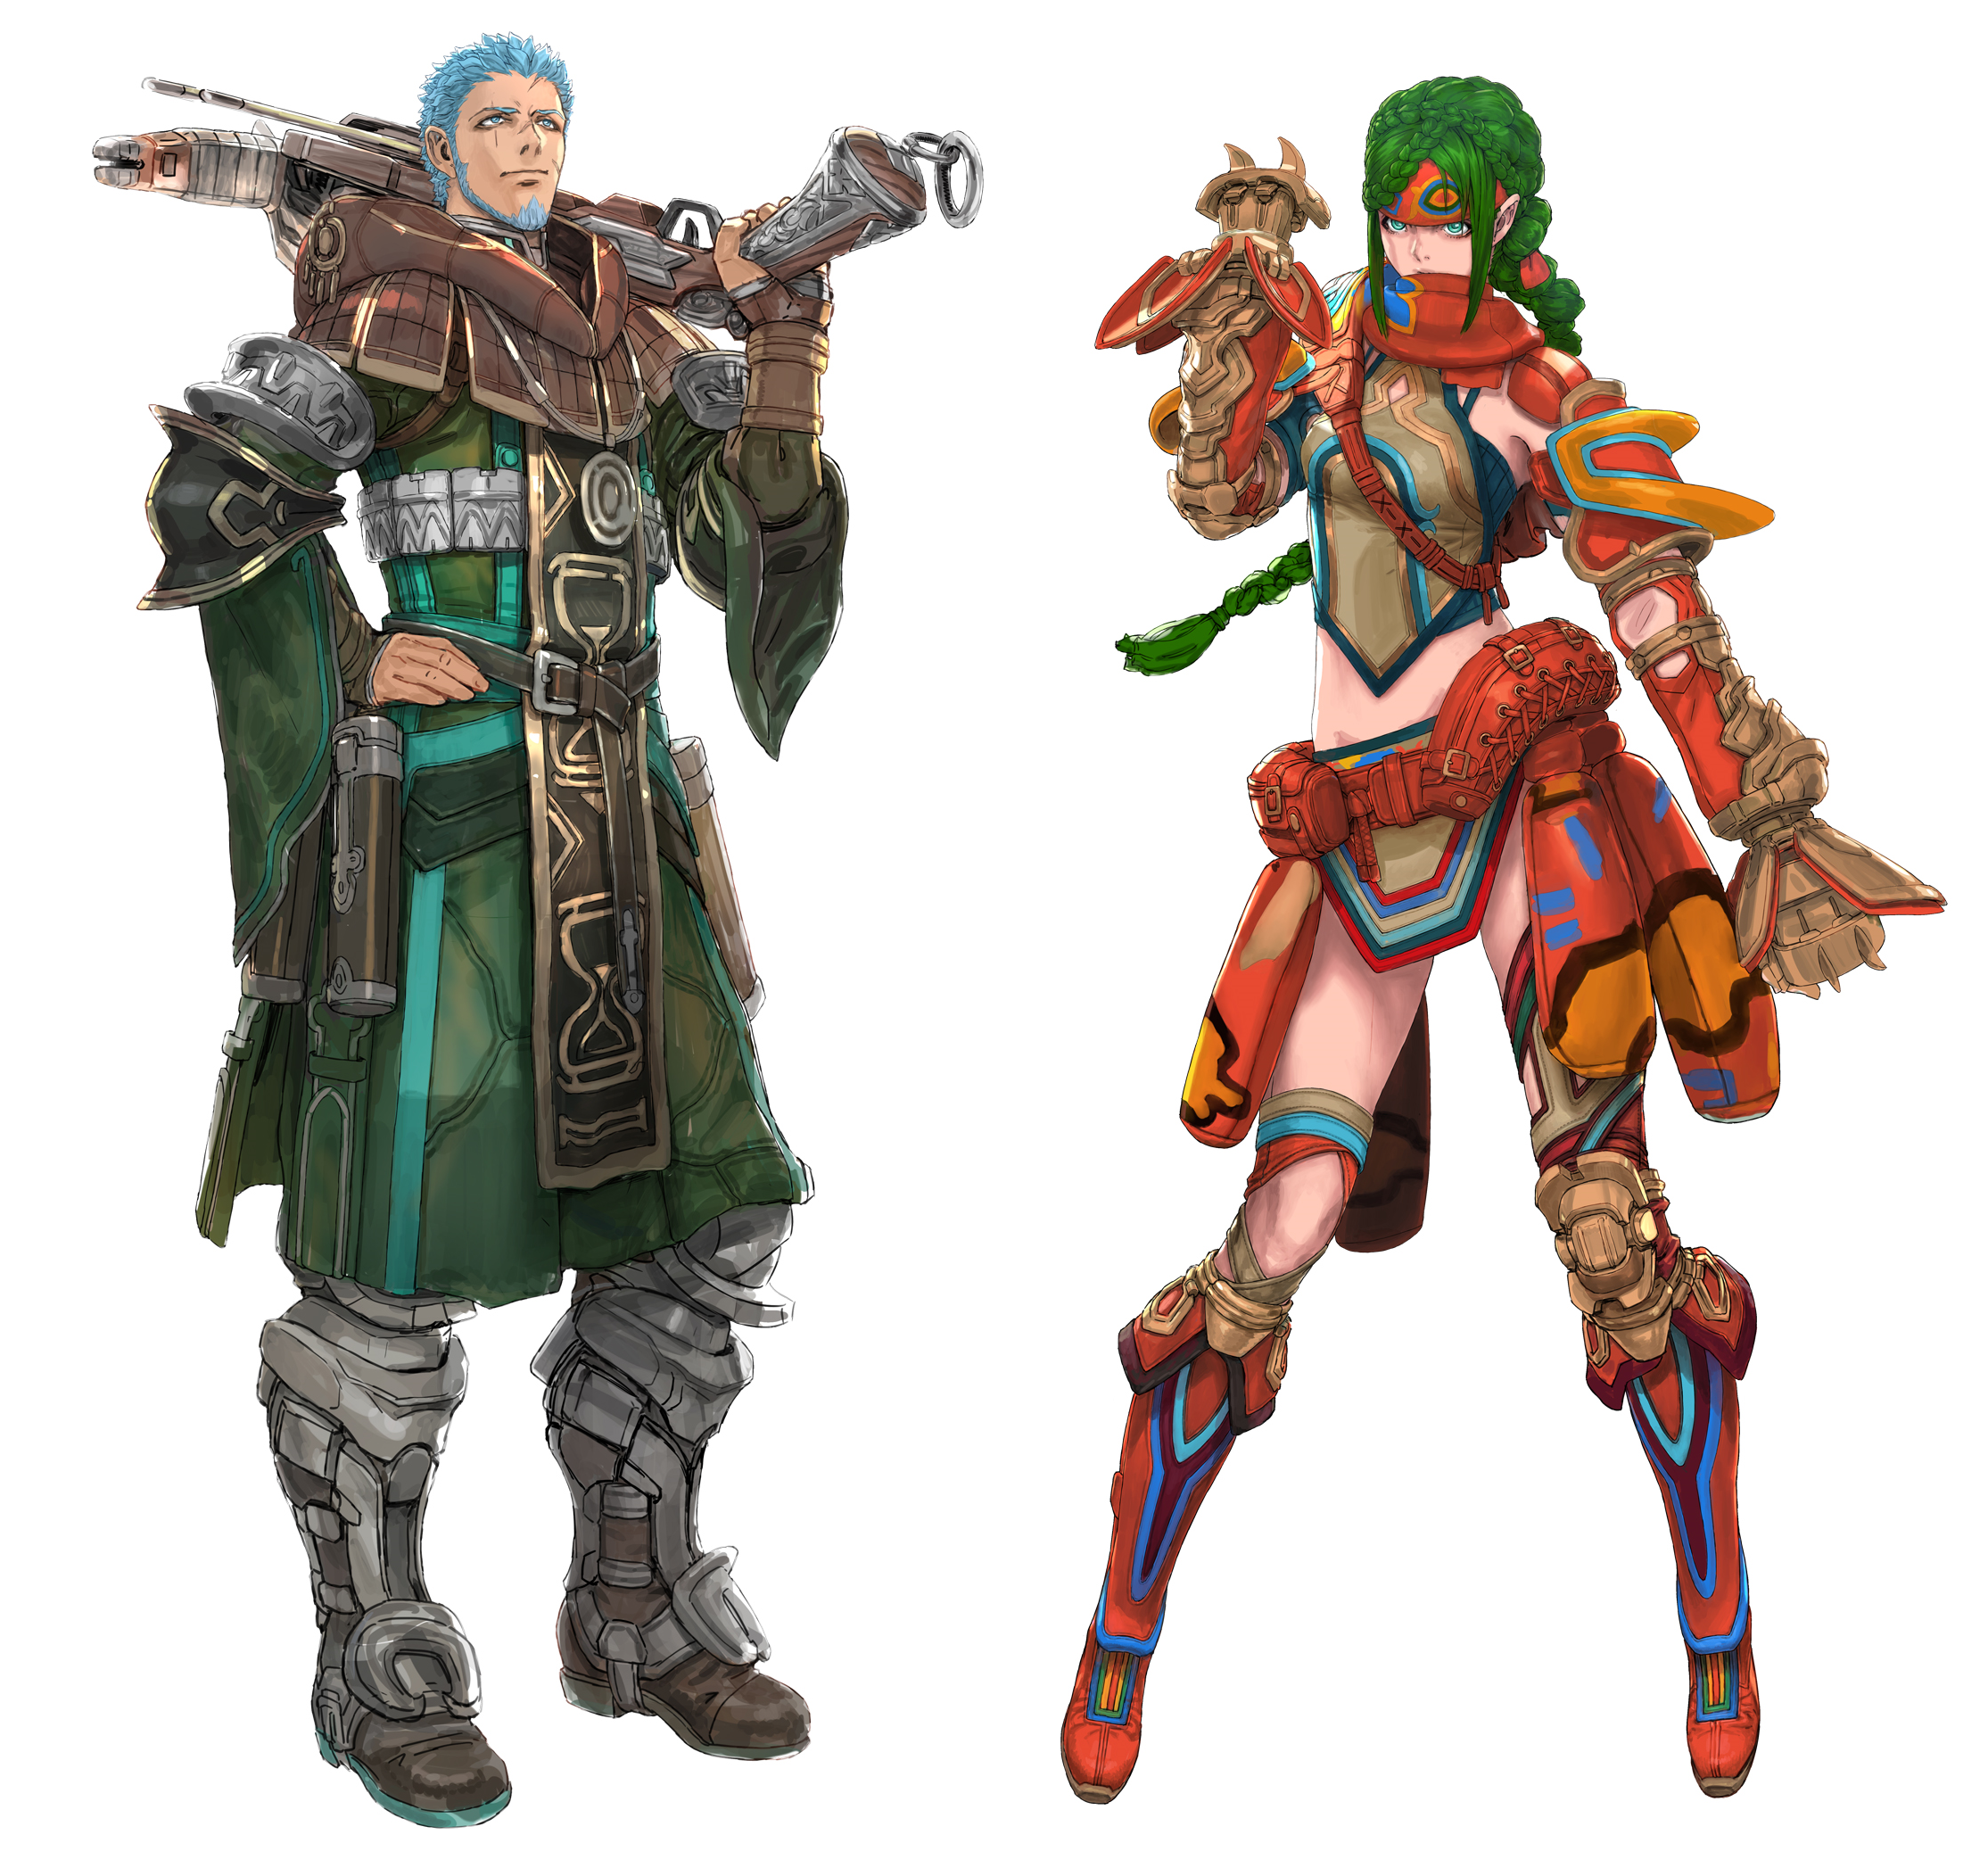 He Is Known To Be Very Frank And Takes A Liking To Alcohol And Women. He Is Accompanied By Anne, A 28 Year Old Who Specializes In Melee Combat. - Star Ocean, Transparent background PNG HD thumbnail